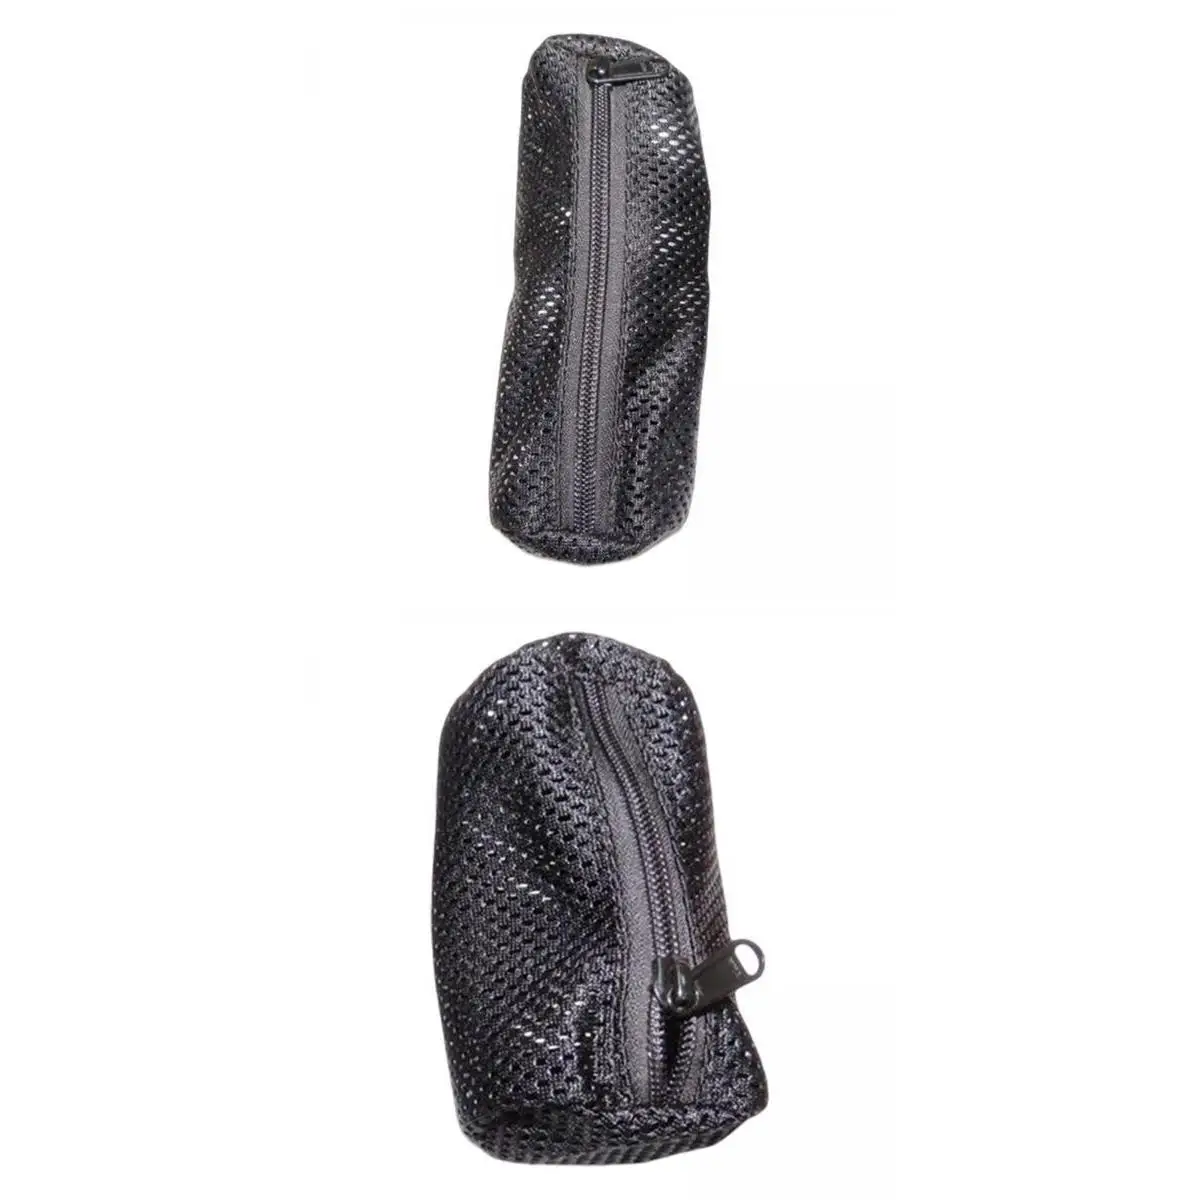 2Packs Durable Double Tank Diving Weight  Bag Dive Accessories Black